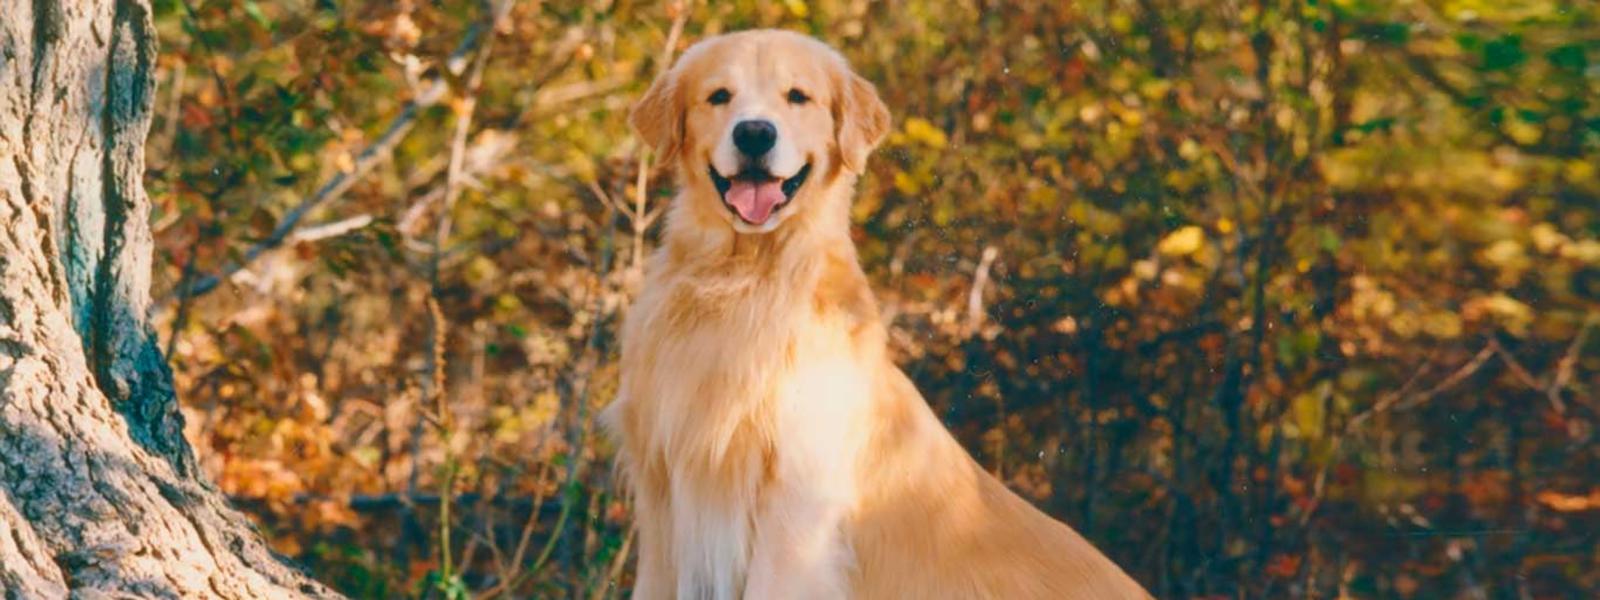 A golden retriever dog standing at the base of a tree with his mouth open and tongue hanging out